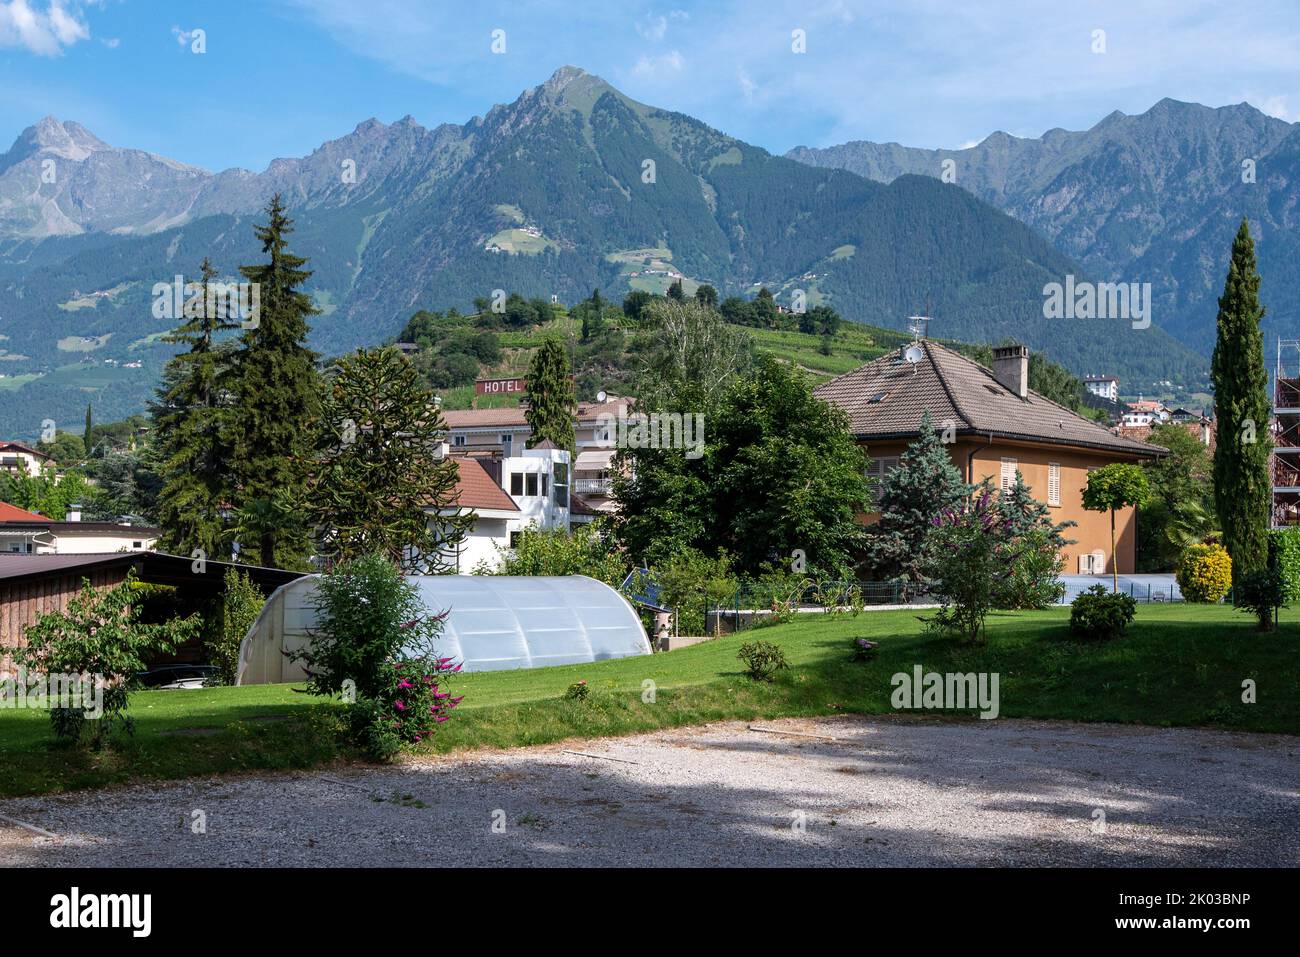 Greenhouse, garden, hotel complex, spa town Merano, South Tyrol, Italy Stock Photo